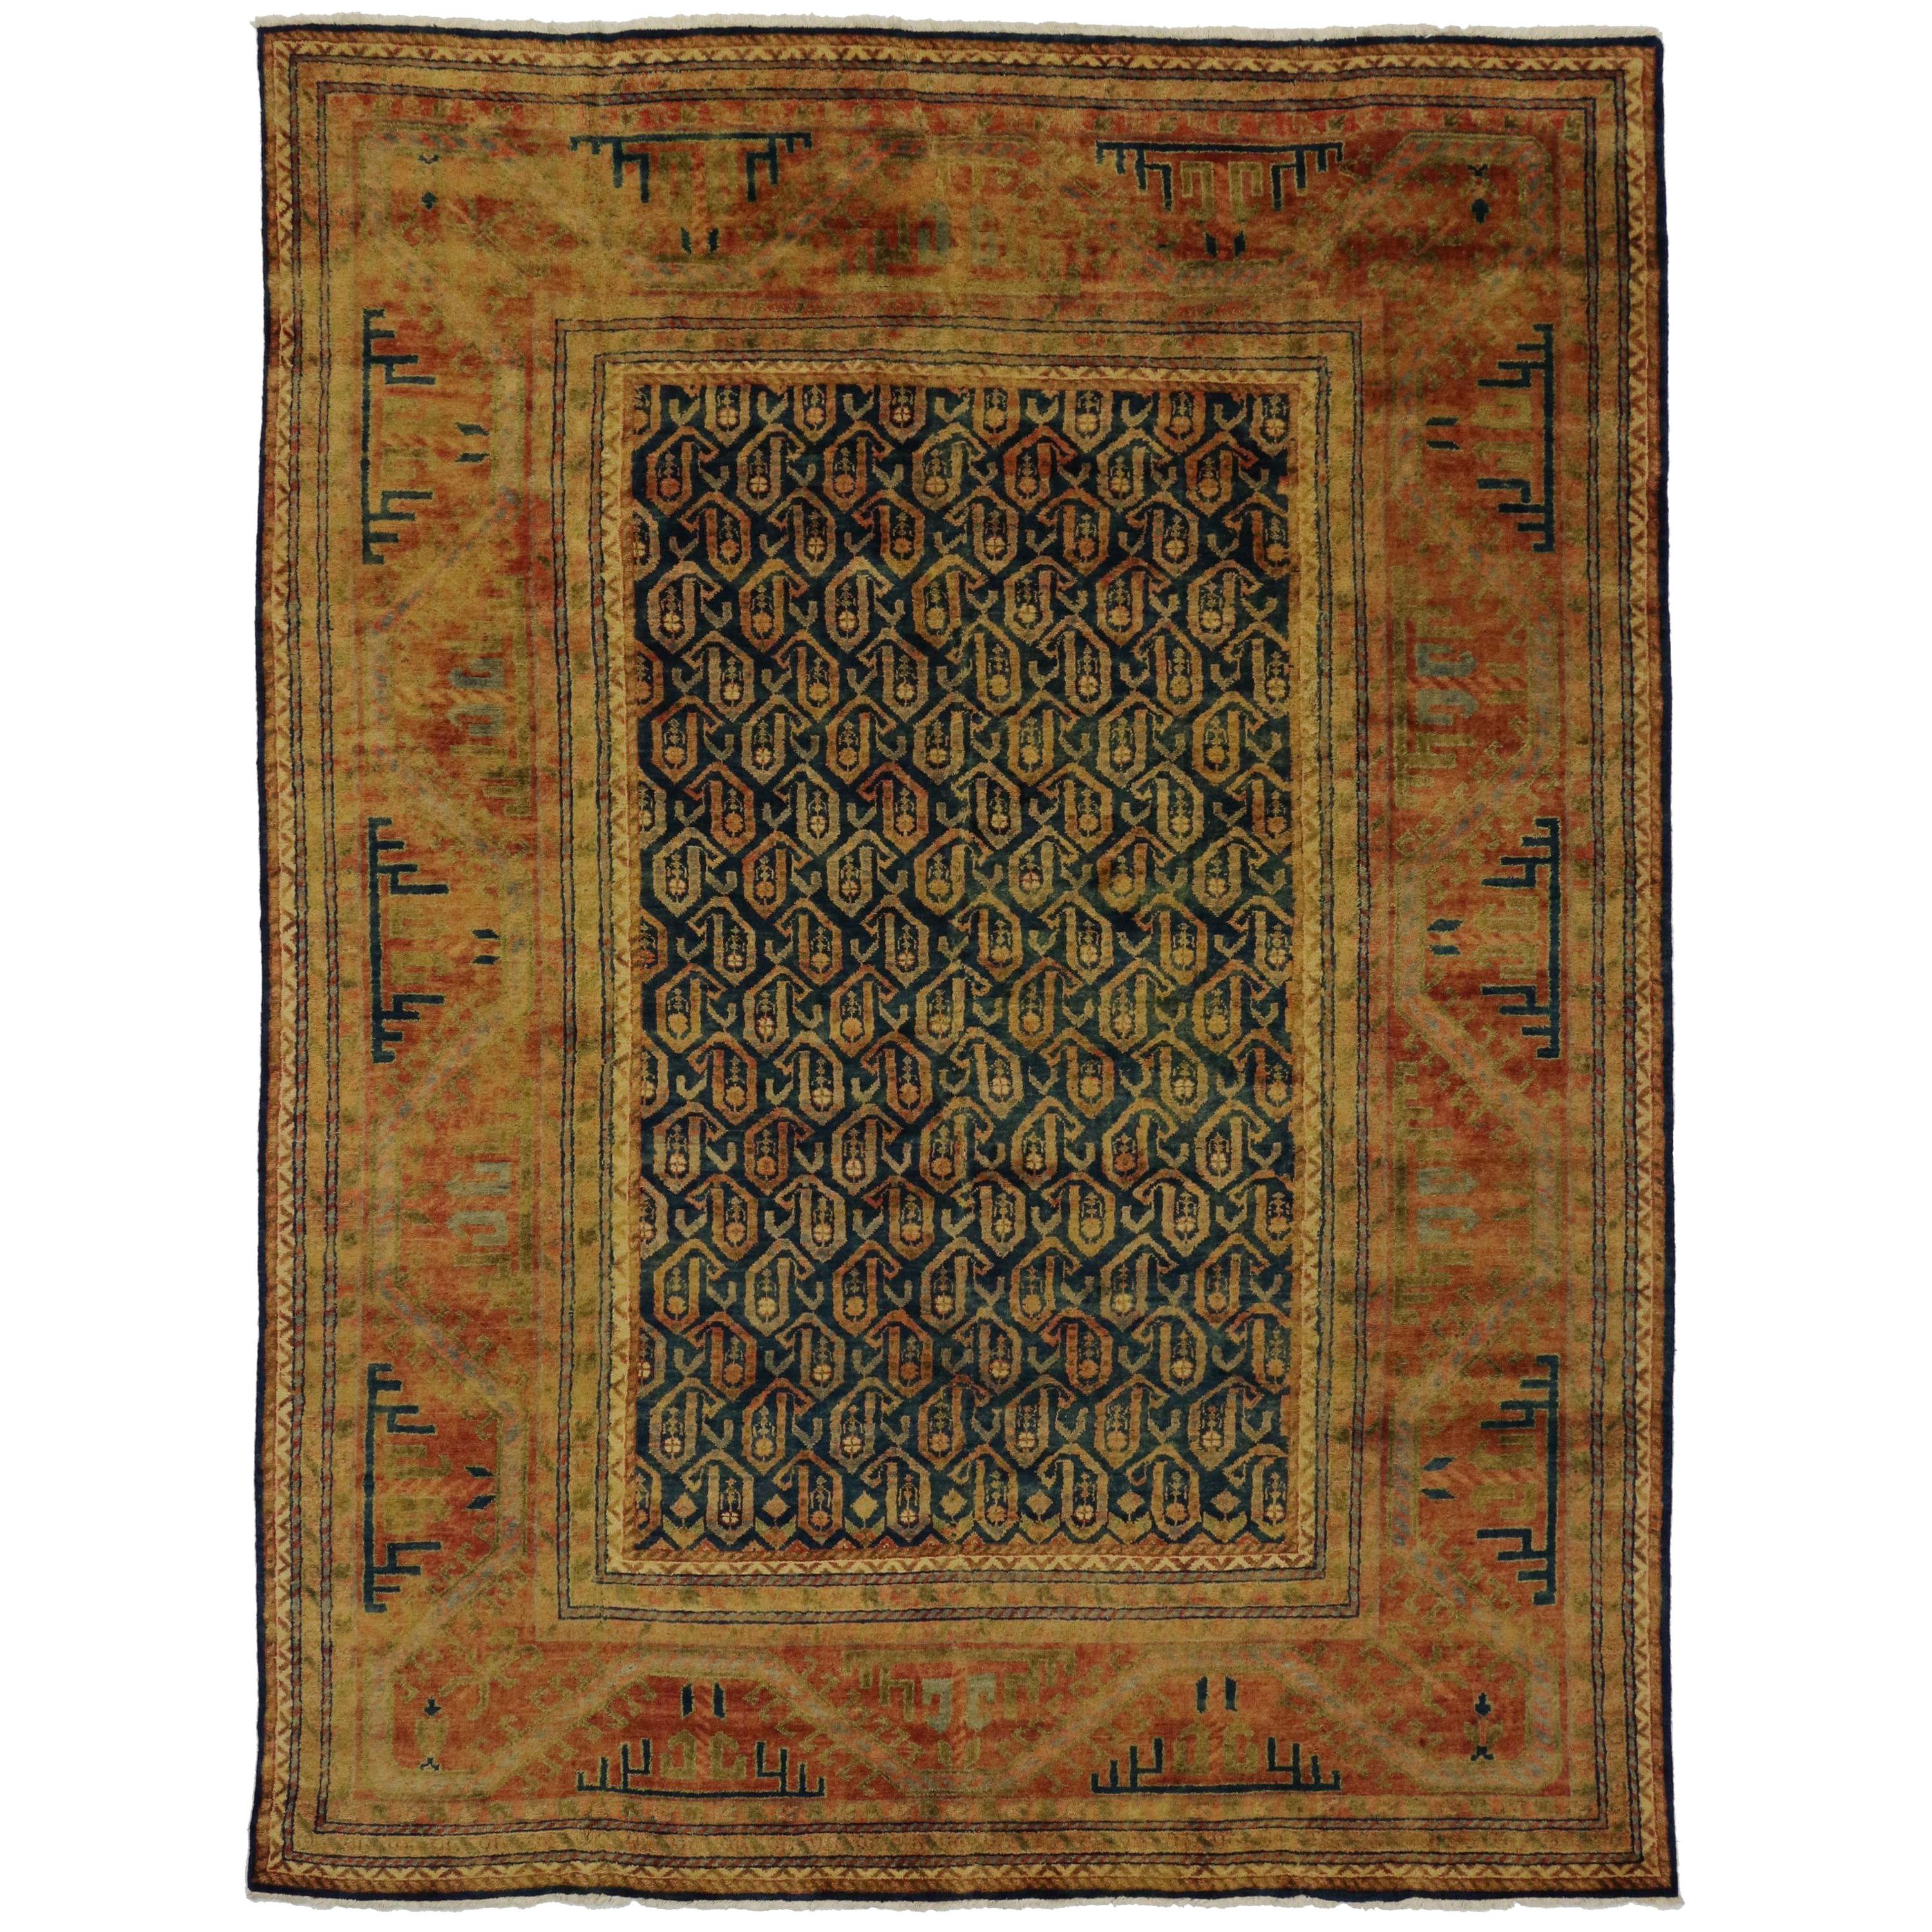 Contemporary Caucasian Kazak Style Area Rug with Arts & Crafts Style